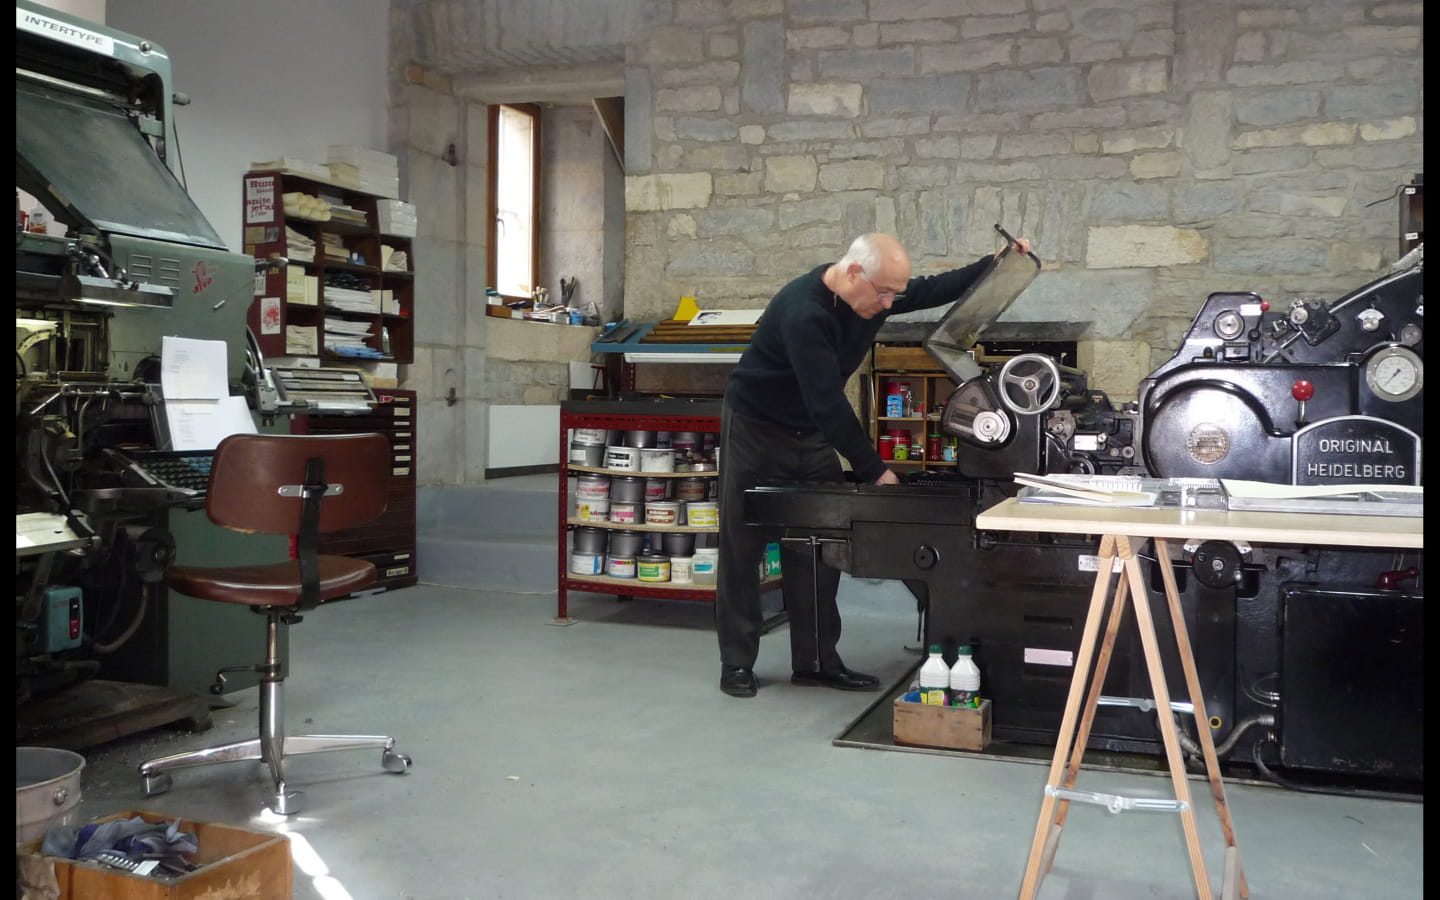 Traditional printing works and baume-les-dames museum